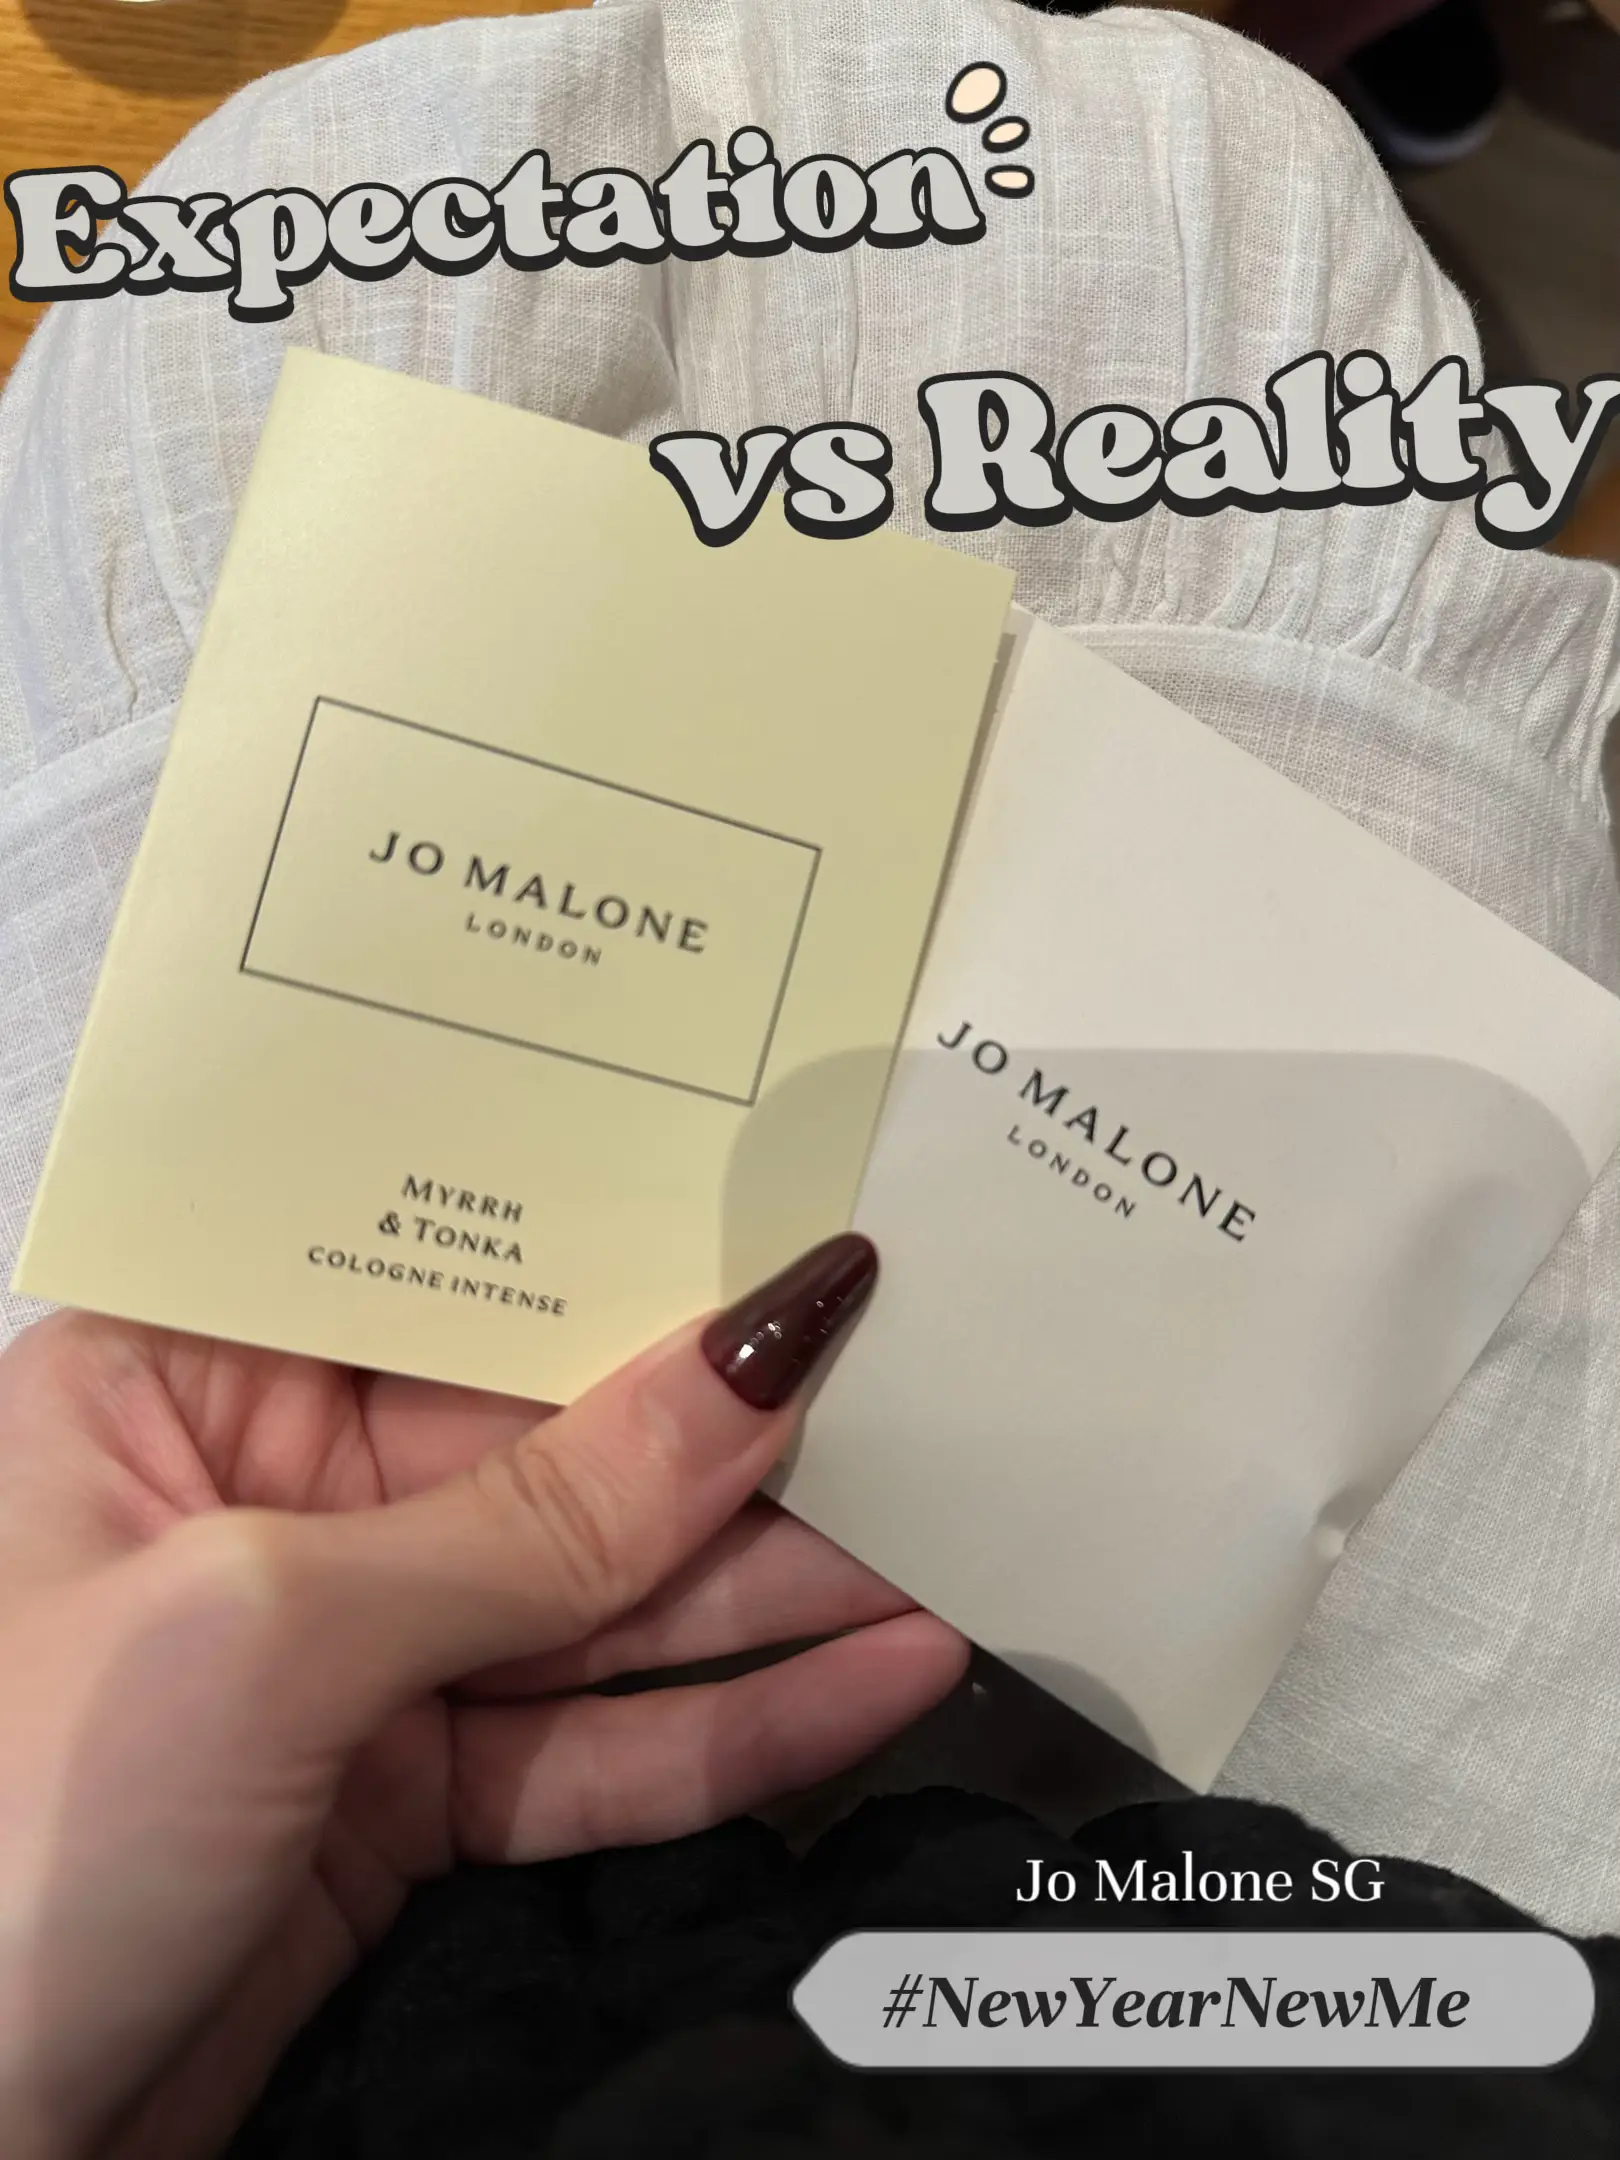 Expectations vs Reality: Jo Malone #NewYearNewMe 💔's images(0)